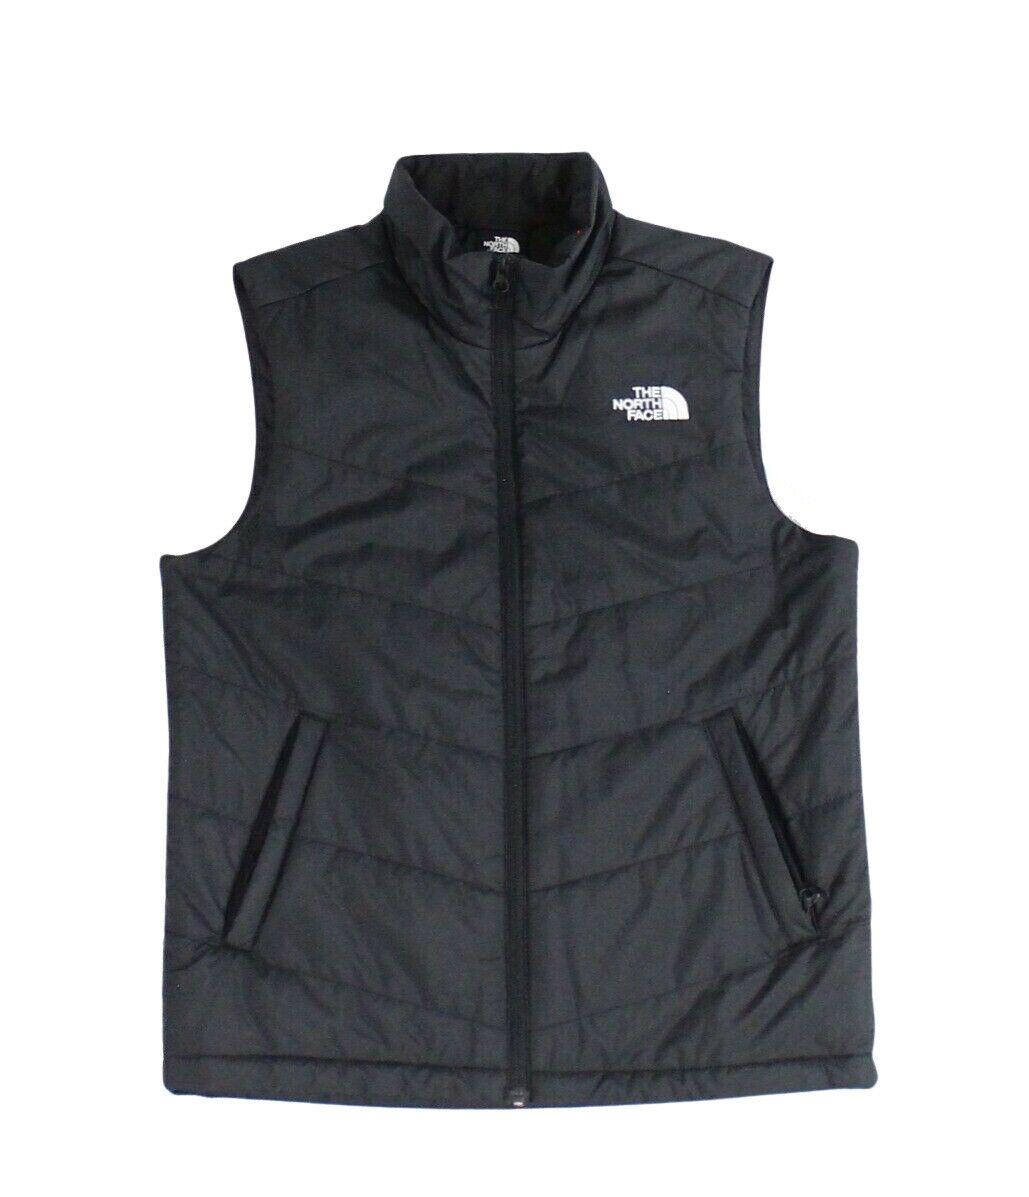 The North Face Men's Size S Junction Insulated Vest Puffer Jacket 